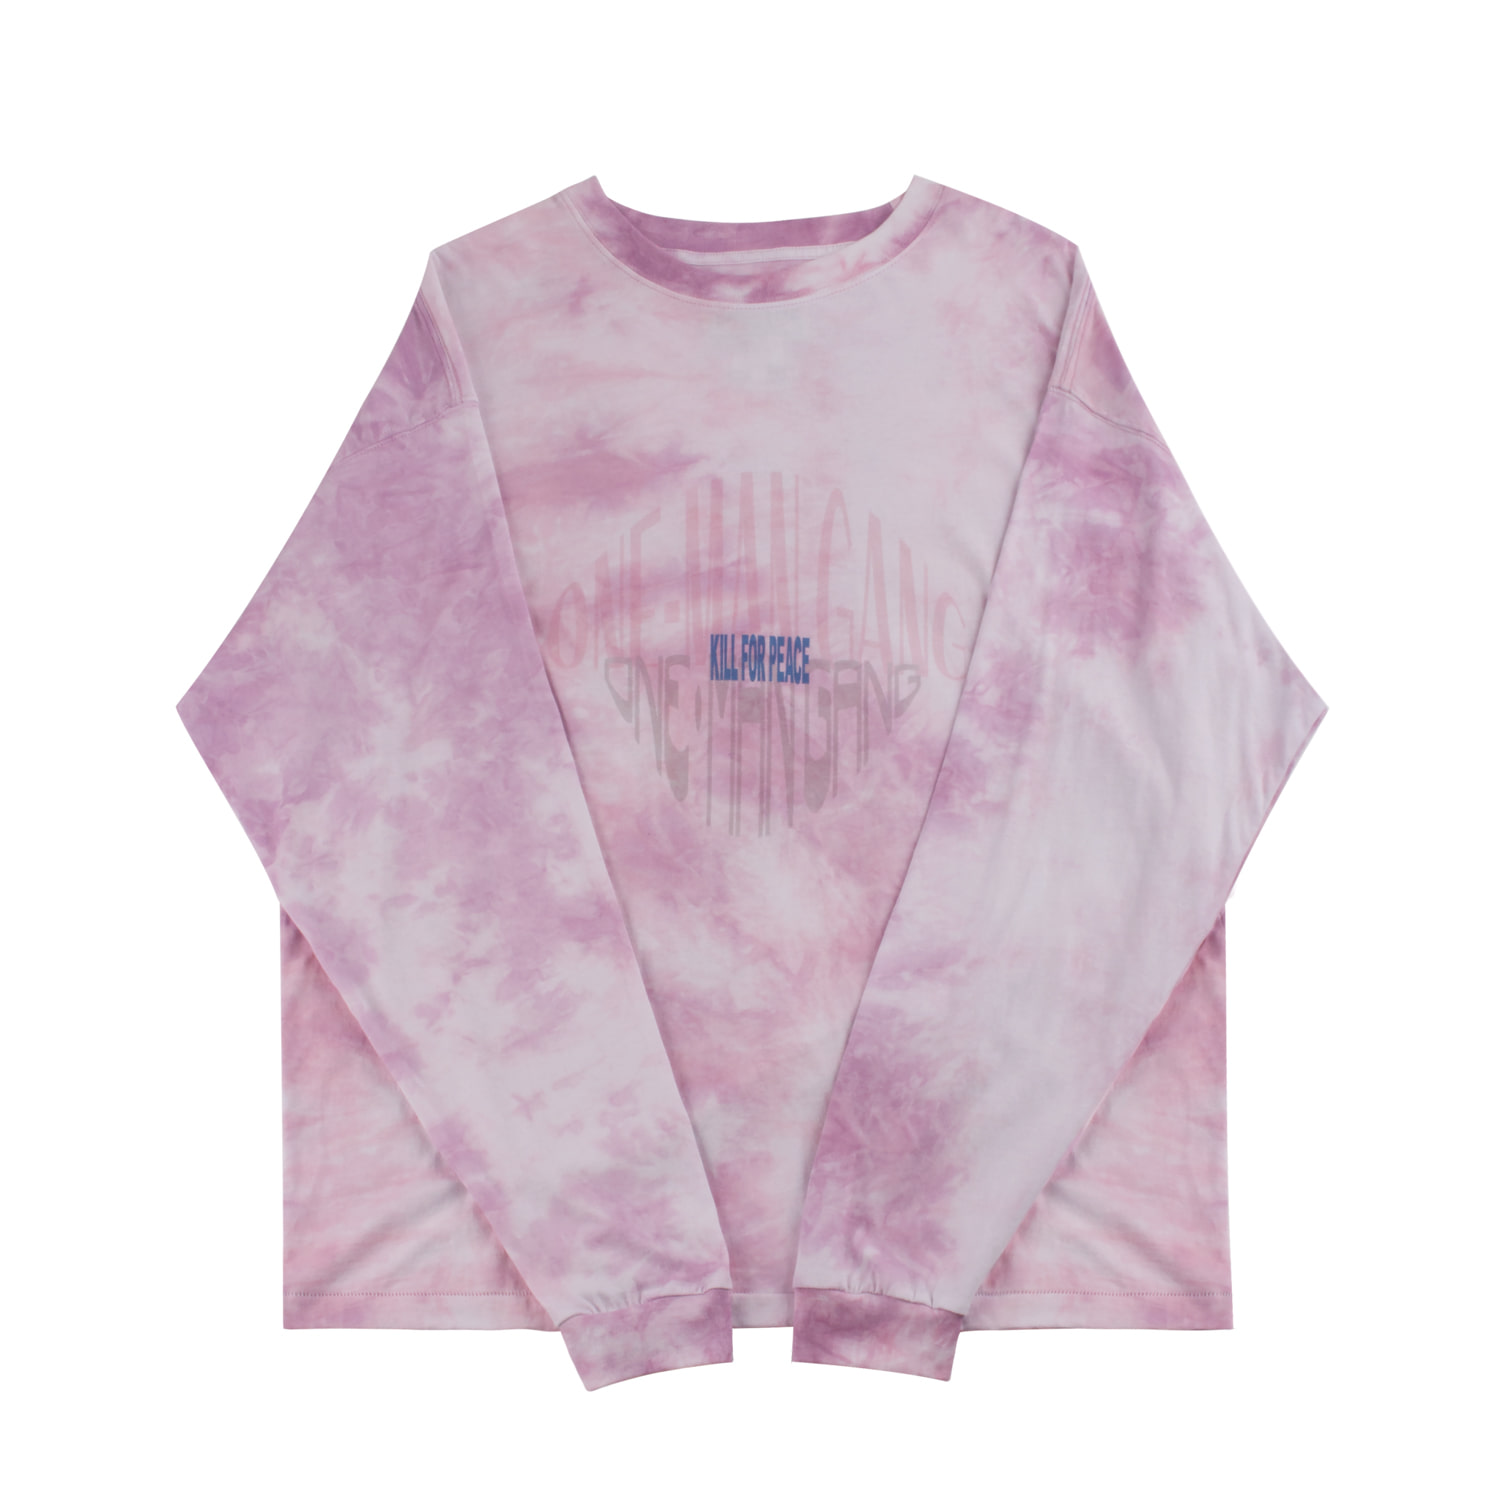 Tuewid day Pink tie dye long sleeve t-shirts